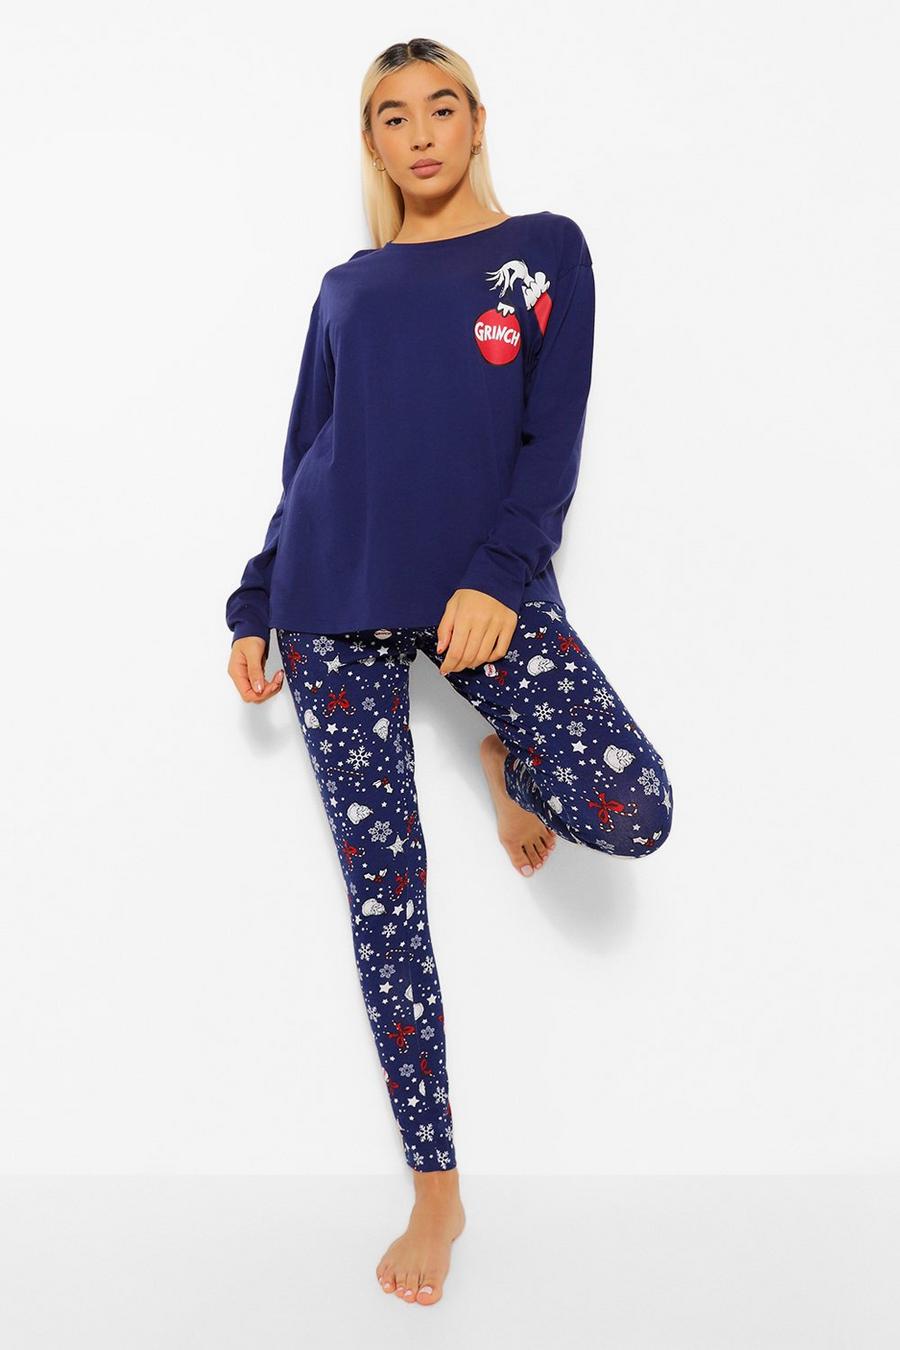 Navy The Grinch Christmas Long Sleeve PJ Set image number 1